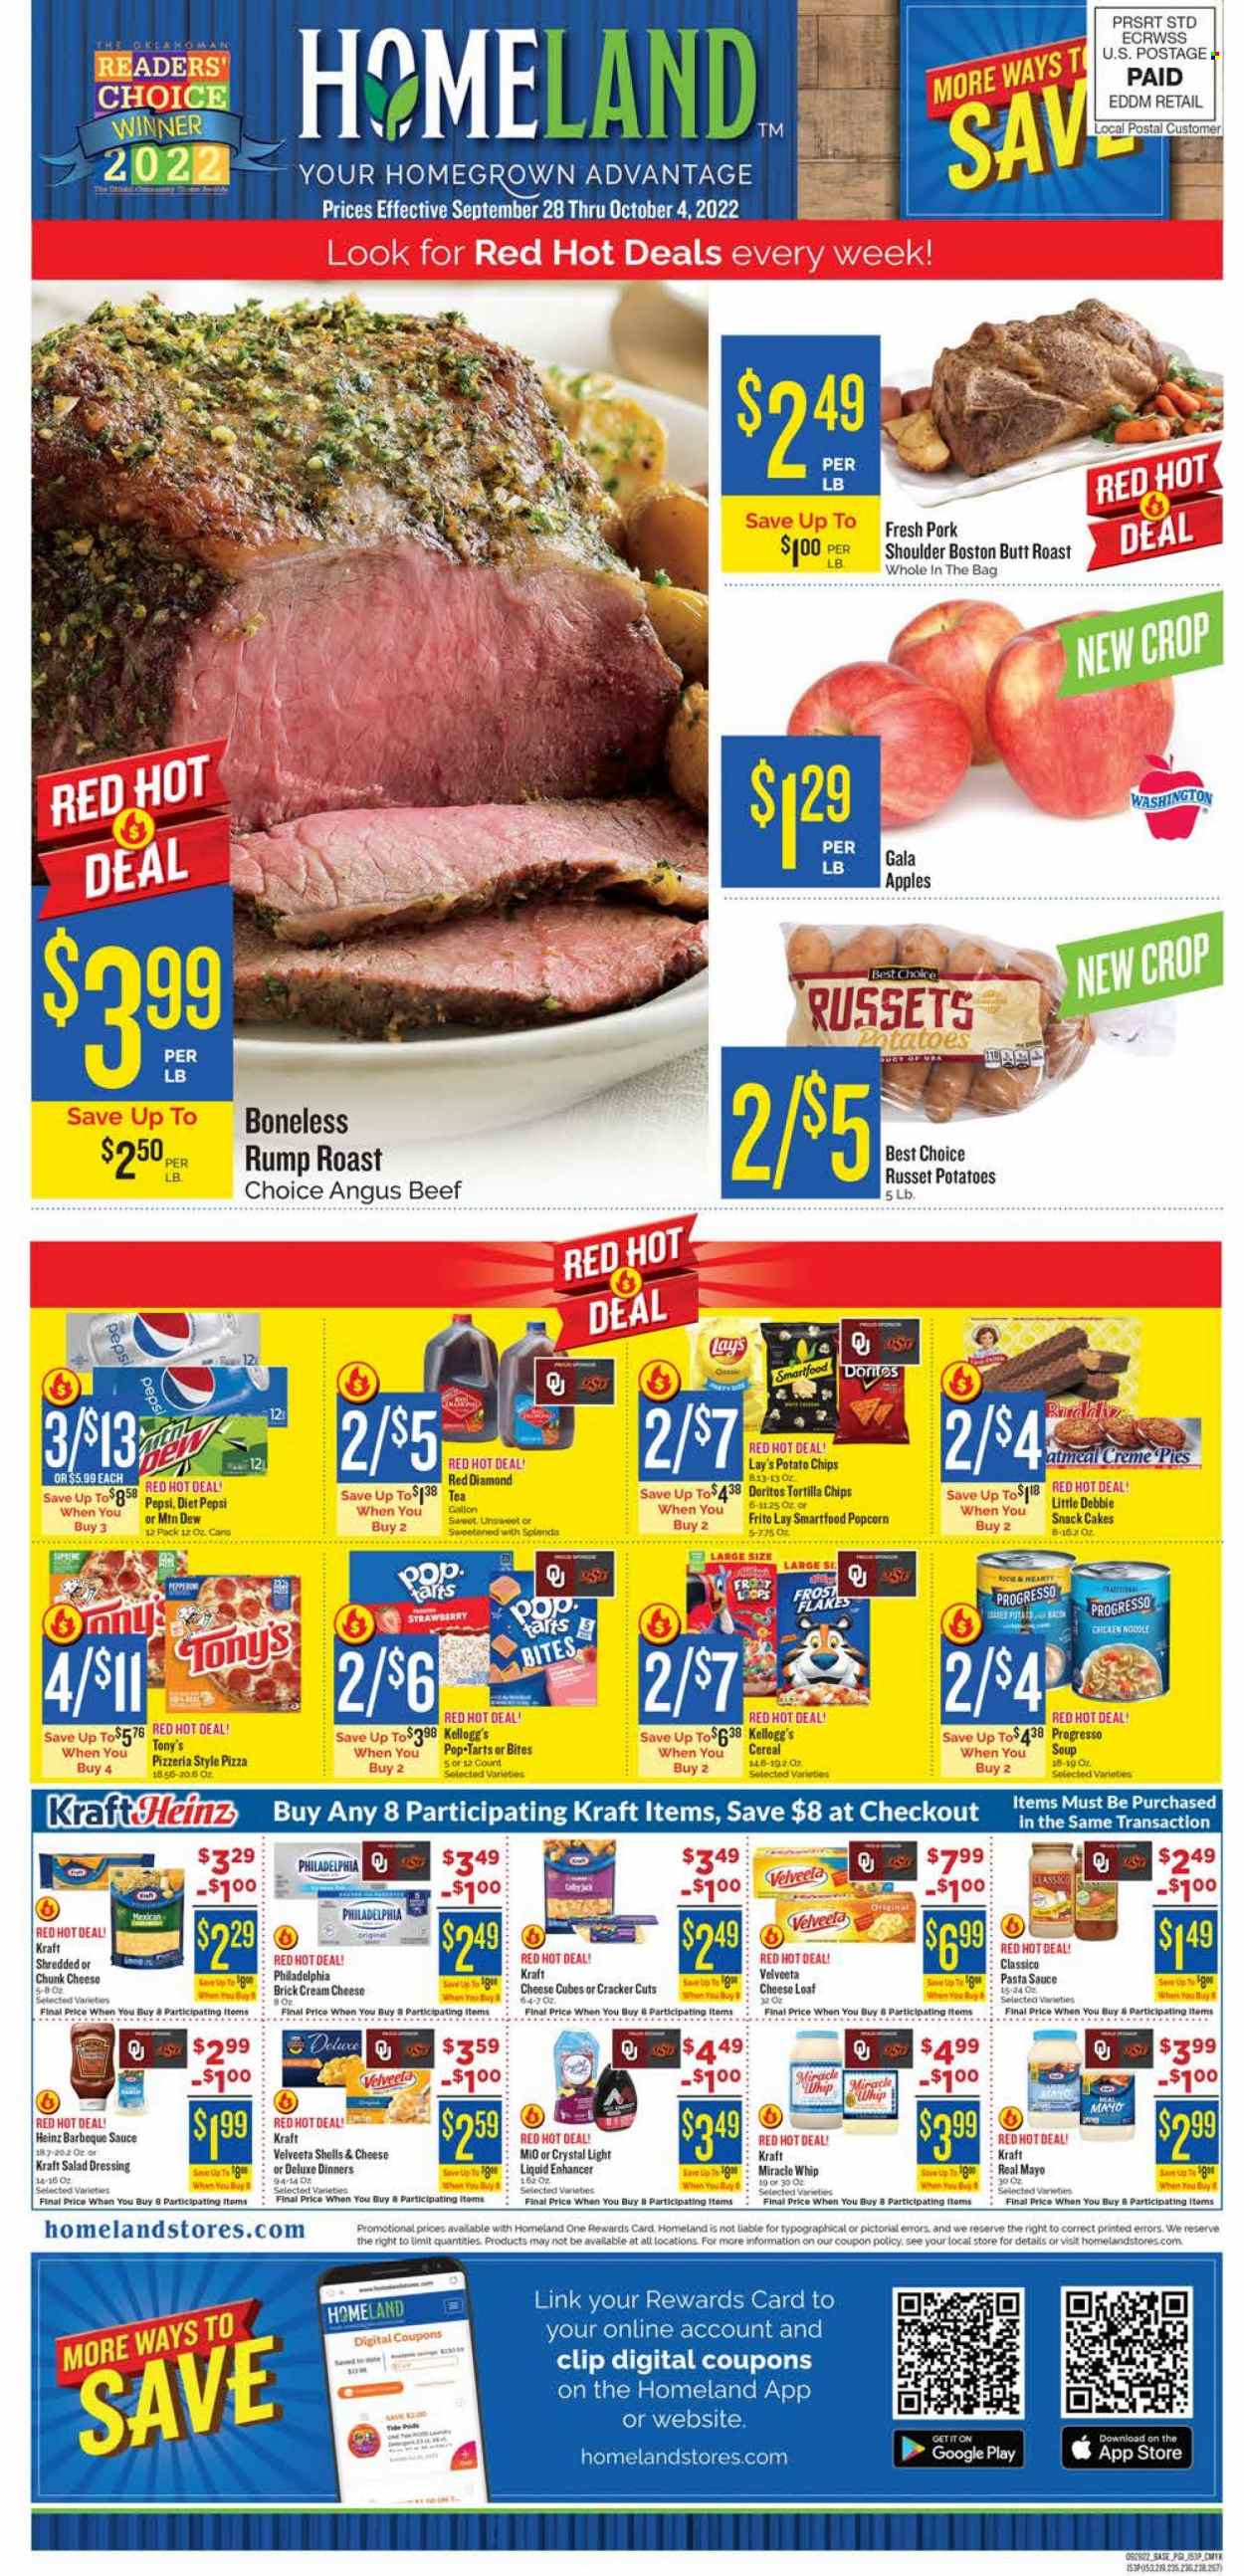 thumbnail - Homeland Flyer - 09/28/2022 - 10/04/2022 - Sales products - cake, russet potatoes, apples, Gala, pizza, pasta sauce, soup, sauce, noodles, Progresso, Kraft®, pepperoni, cream cheese, Philadelphia, chunk cheese, mayonnaise, Miracle Whip, snack, crackers, Kellogg's, Pop-Tarts, Doritos, tortilla chips, potato chips, chips, Lay’s, Smartfood, popcorn, Heinz, cereals, BBQ sauce, salad dressing, dressing, Classico, Mountain Dew, Pepsi, Diet Pepsi, tea, beef meat, pork meat, pork shoulder, Tide. Page 1.